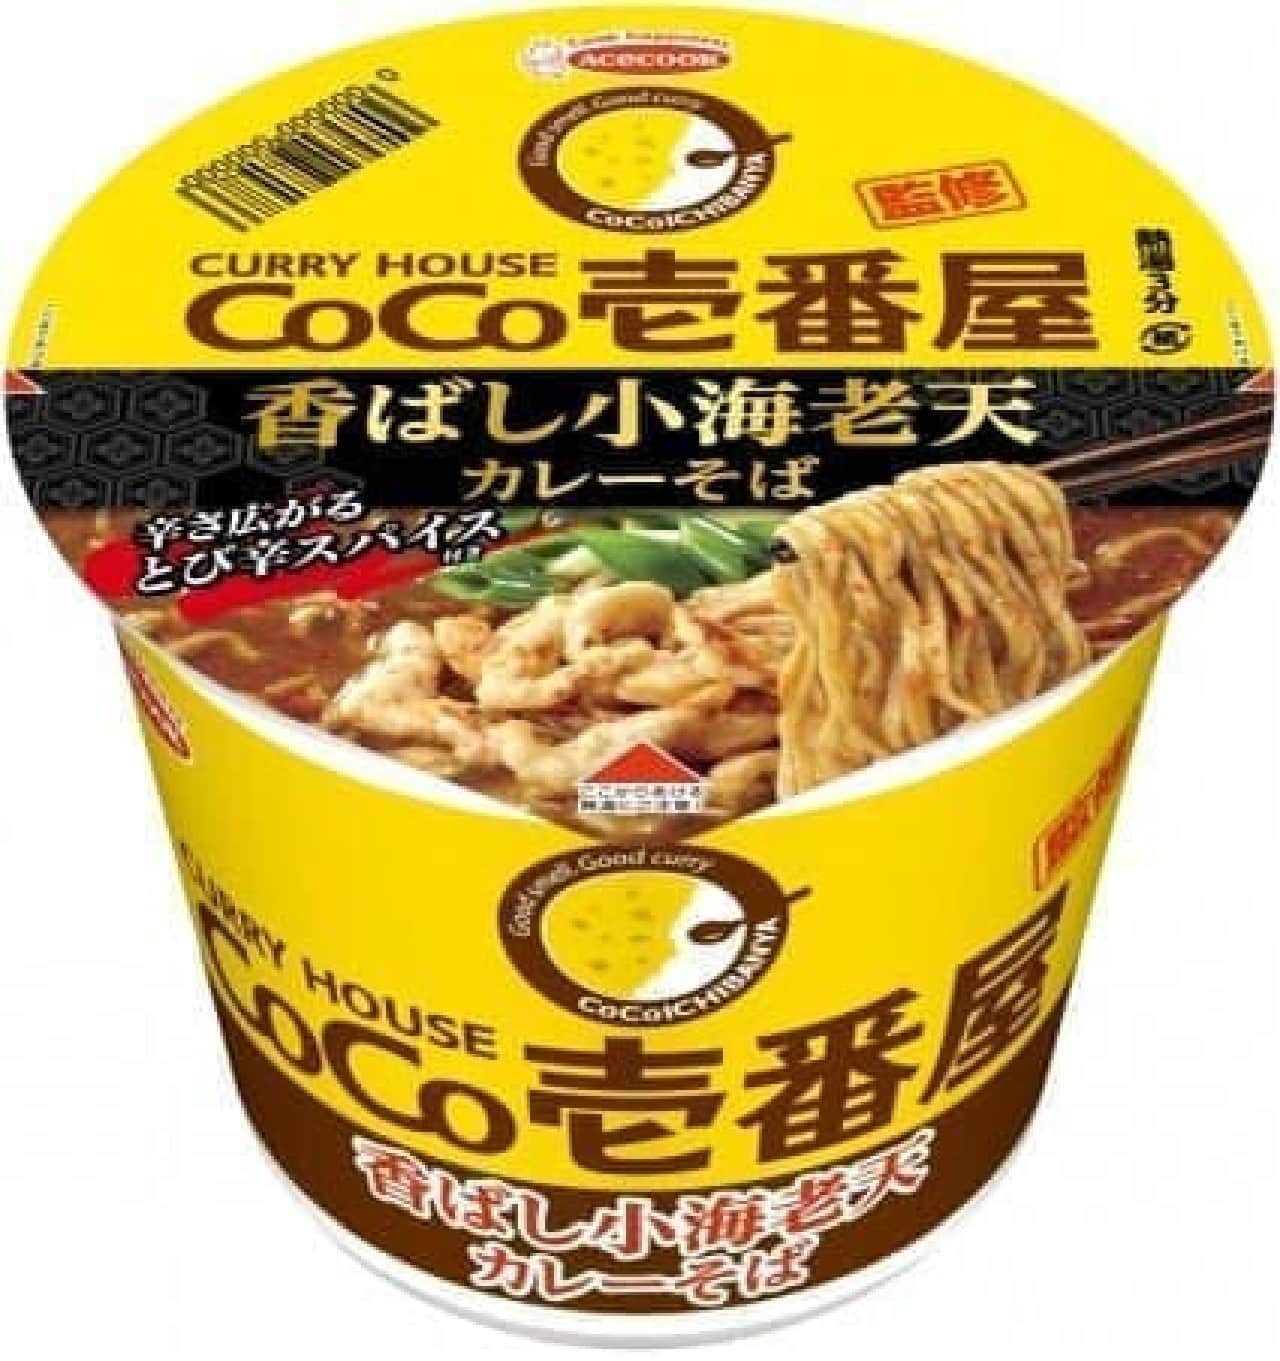 Introducing cup soba supervised by Cocoichi!